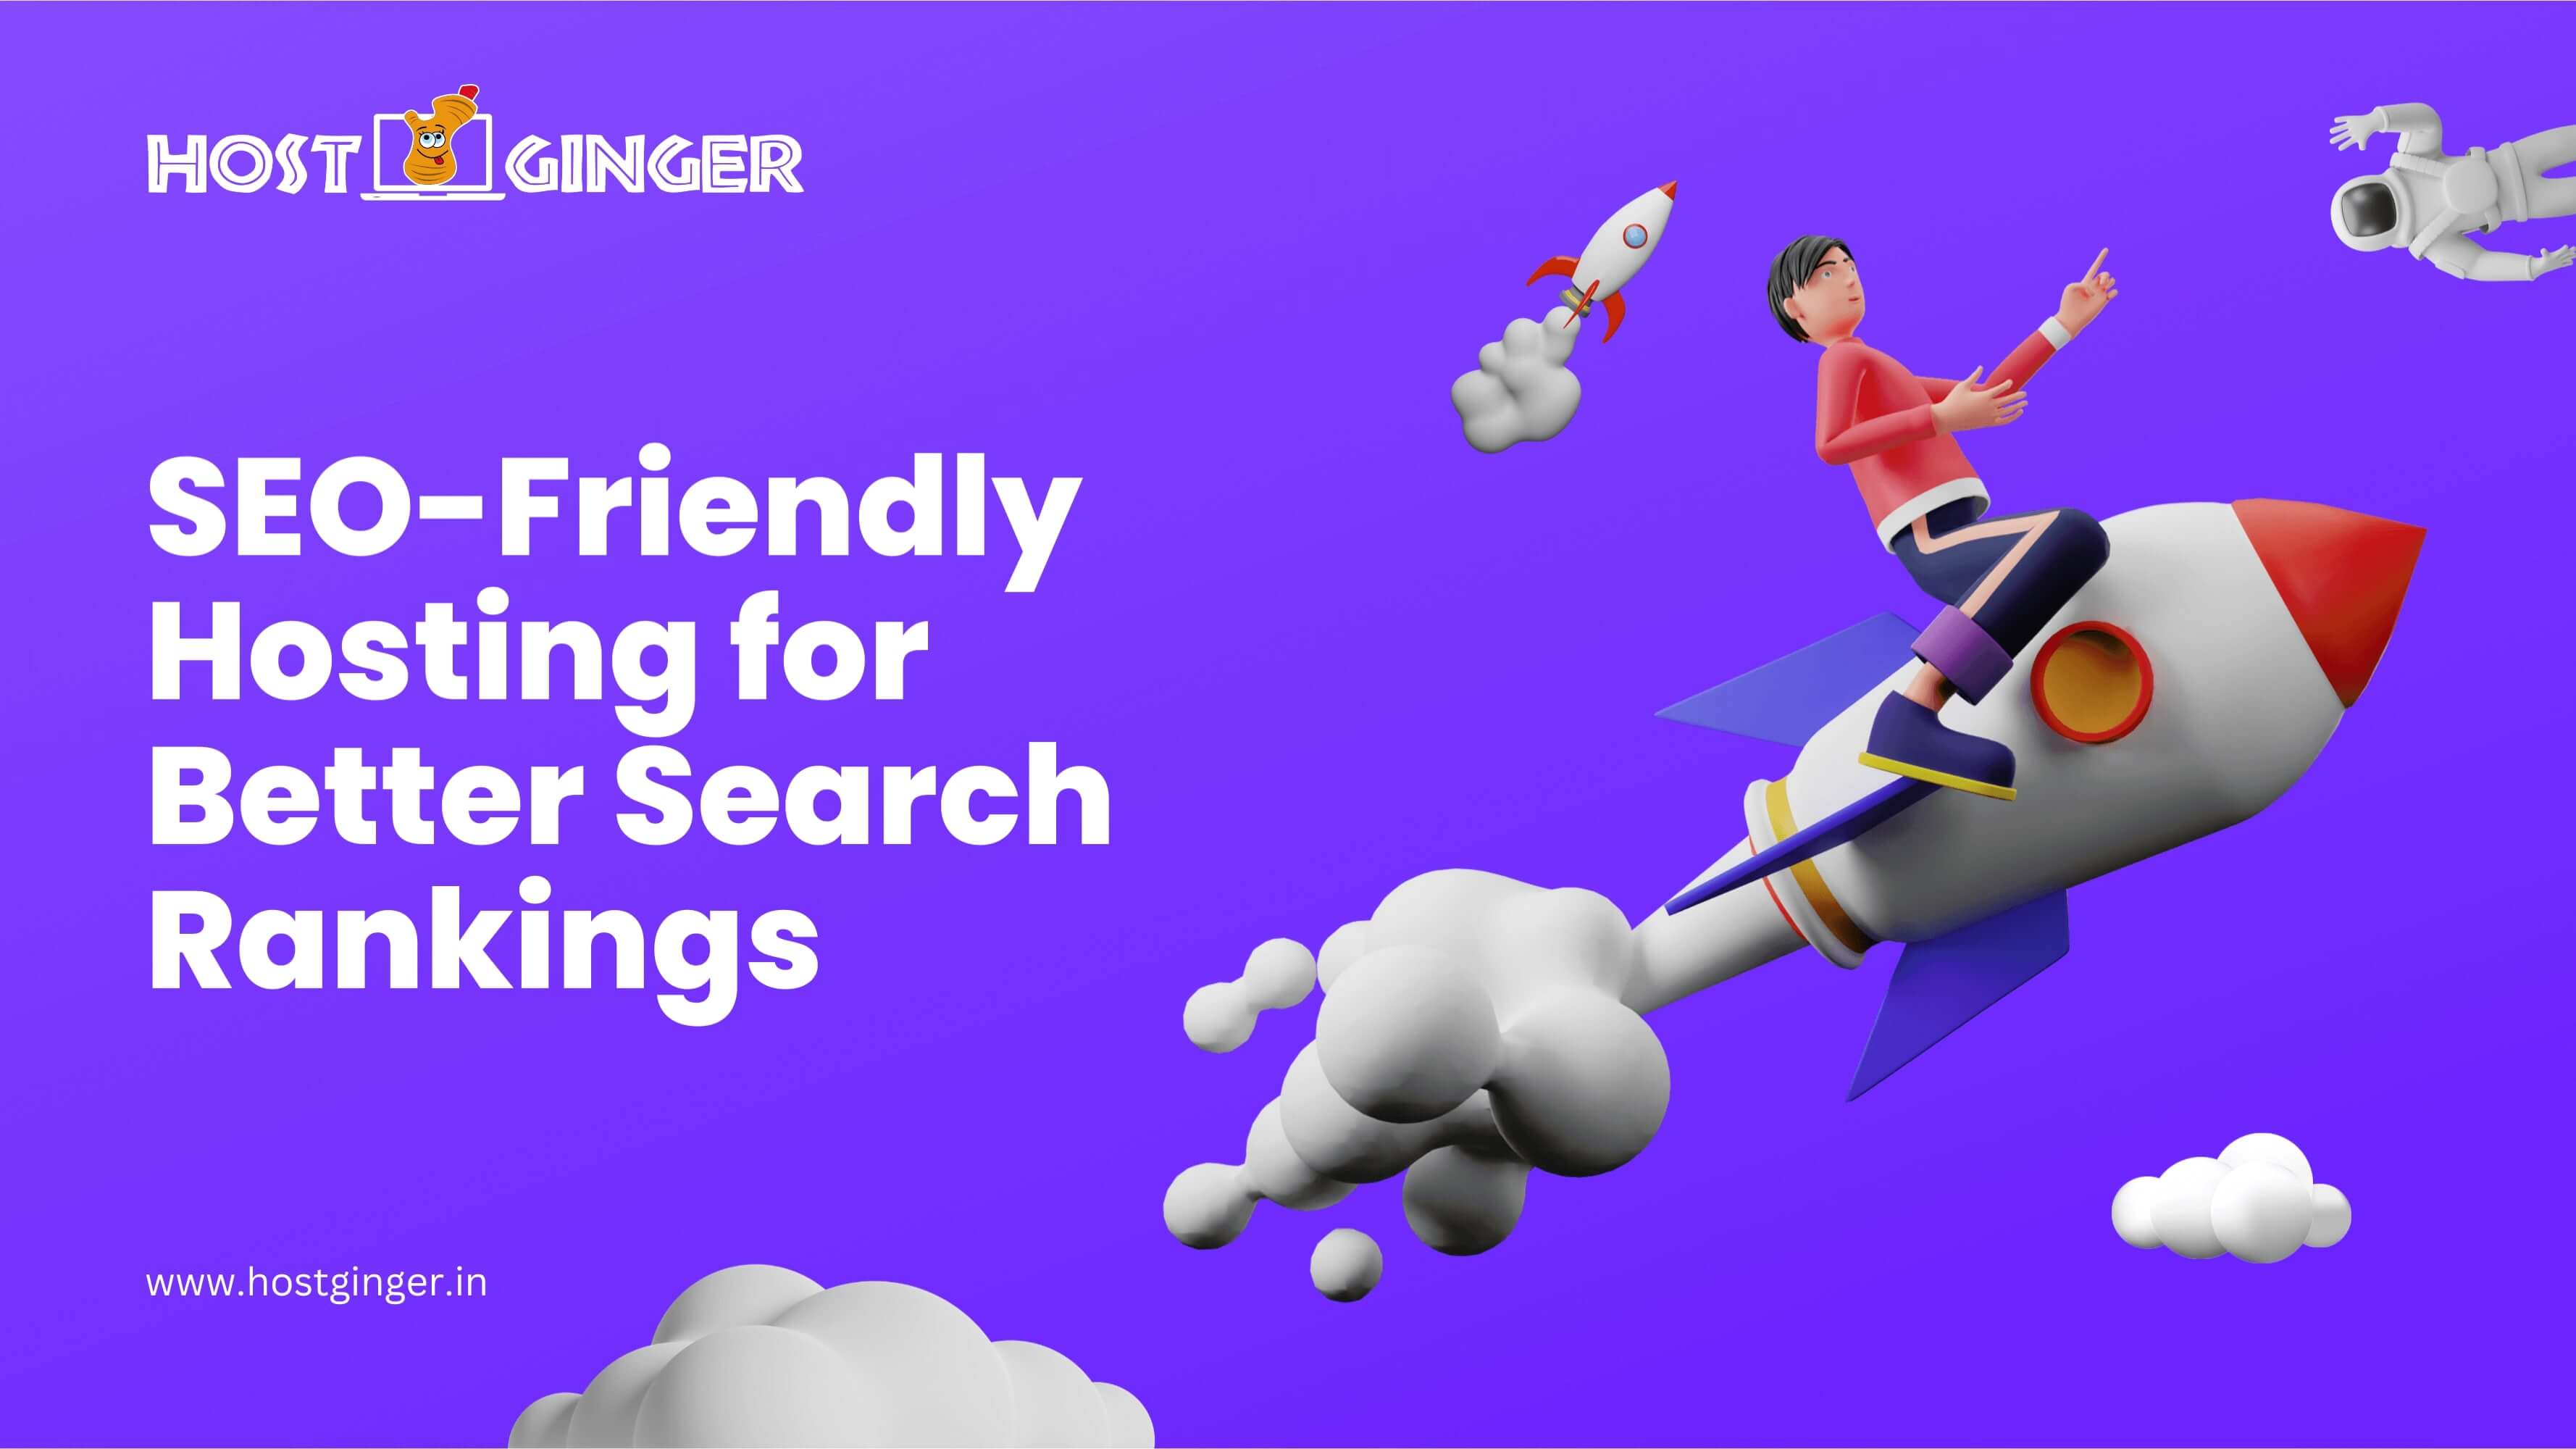 SEO-Friendly Hosting for Better Search Rankings